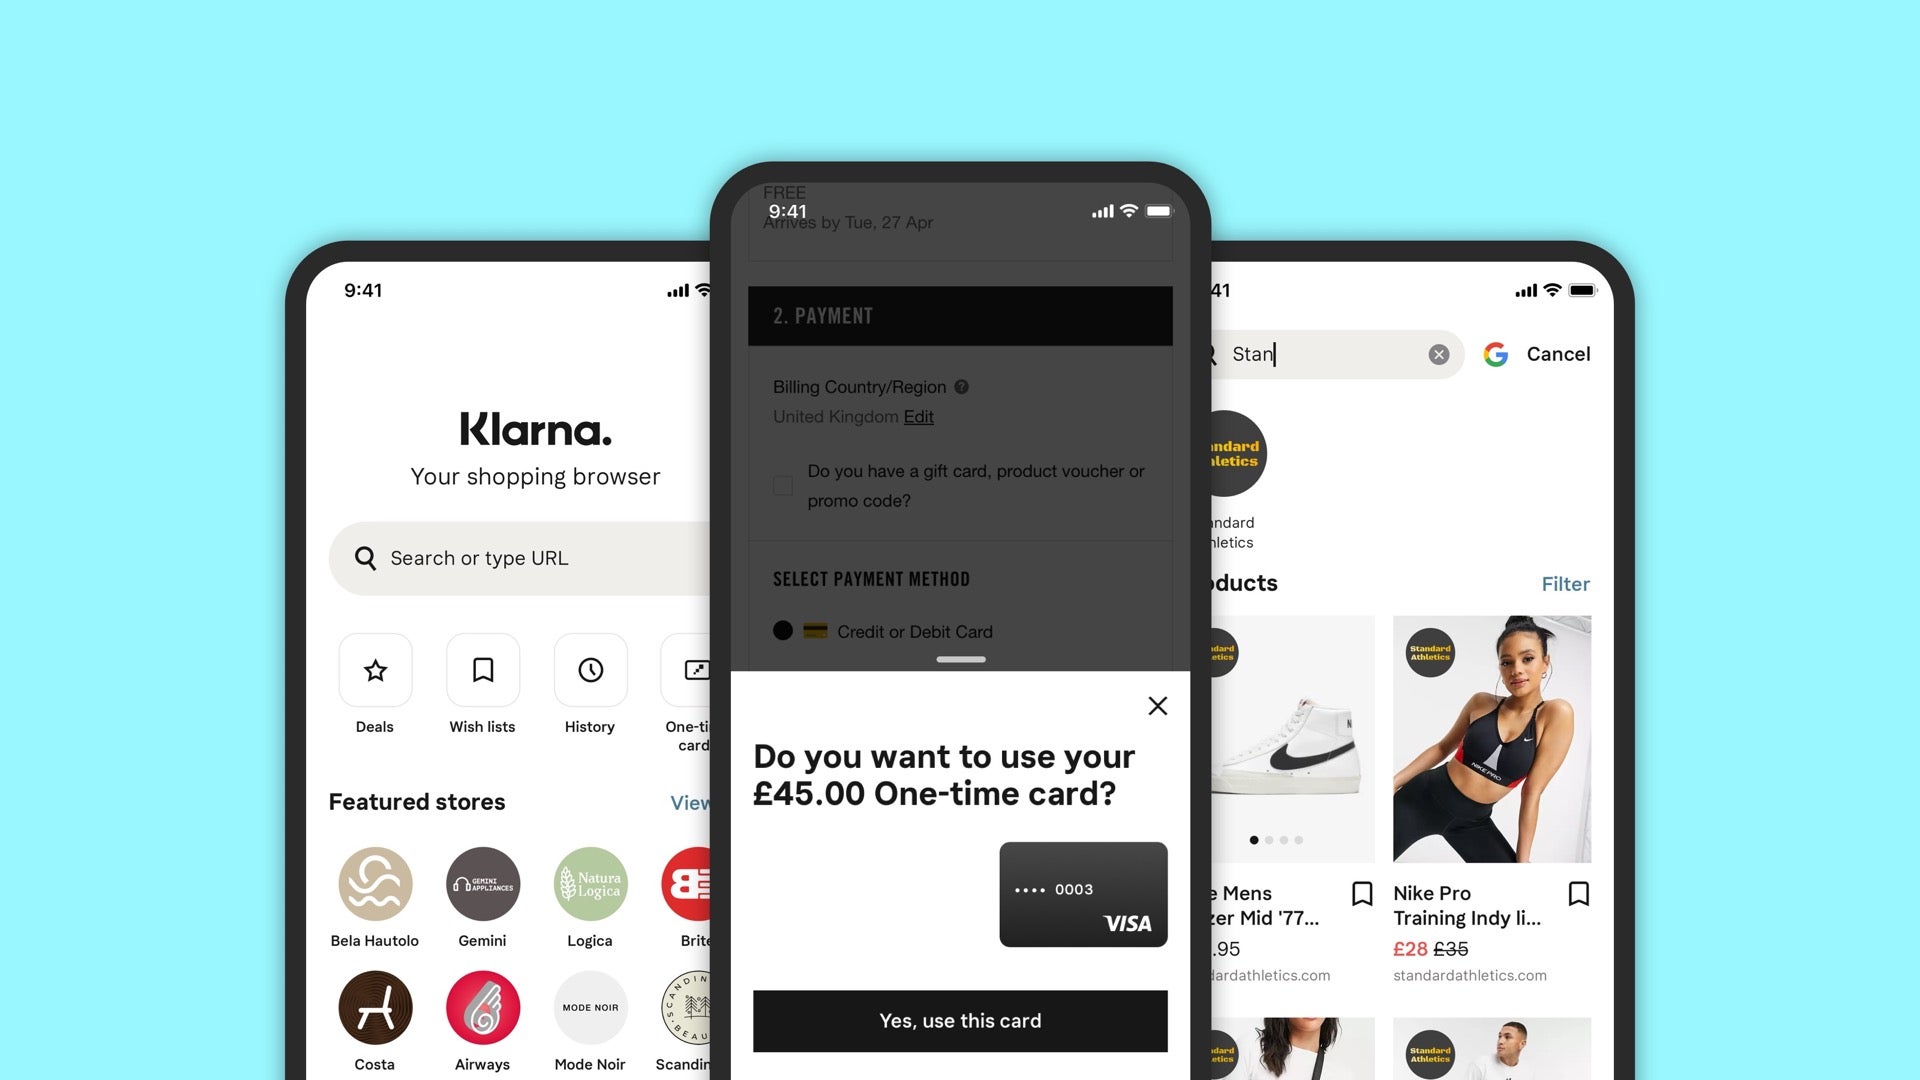 Klarna denies copying Shopping app features from Zilch